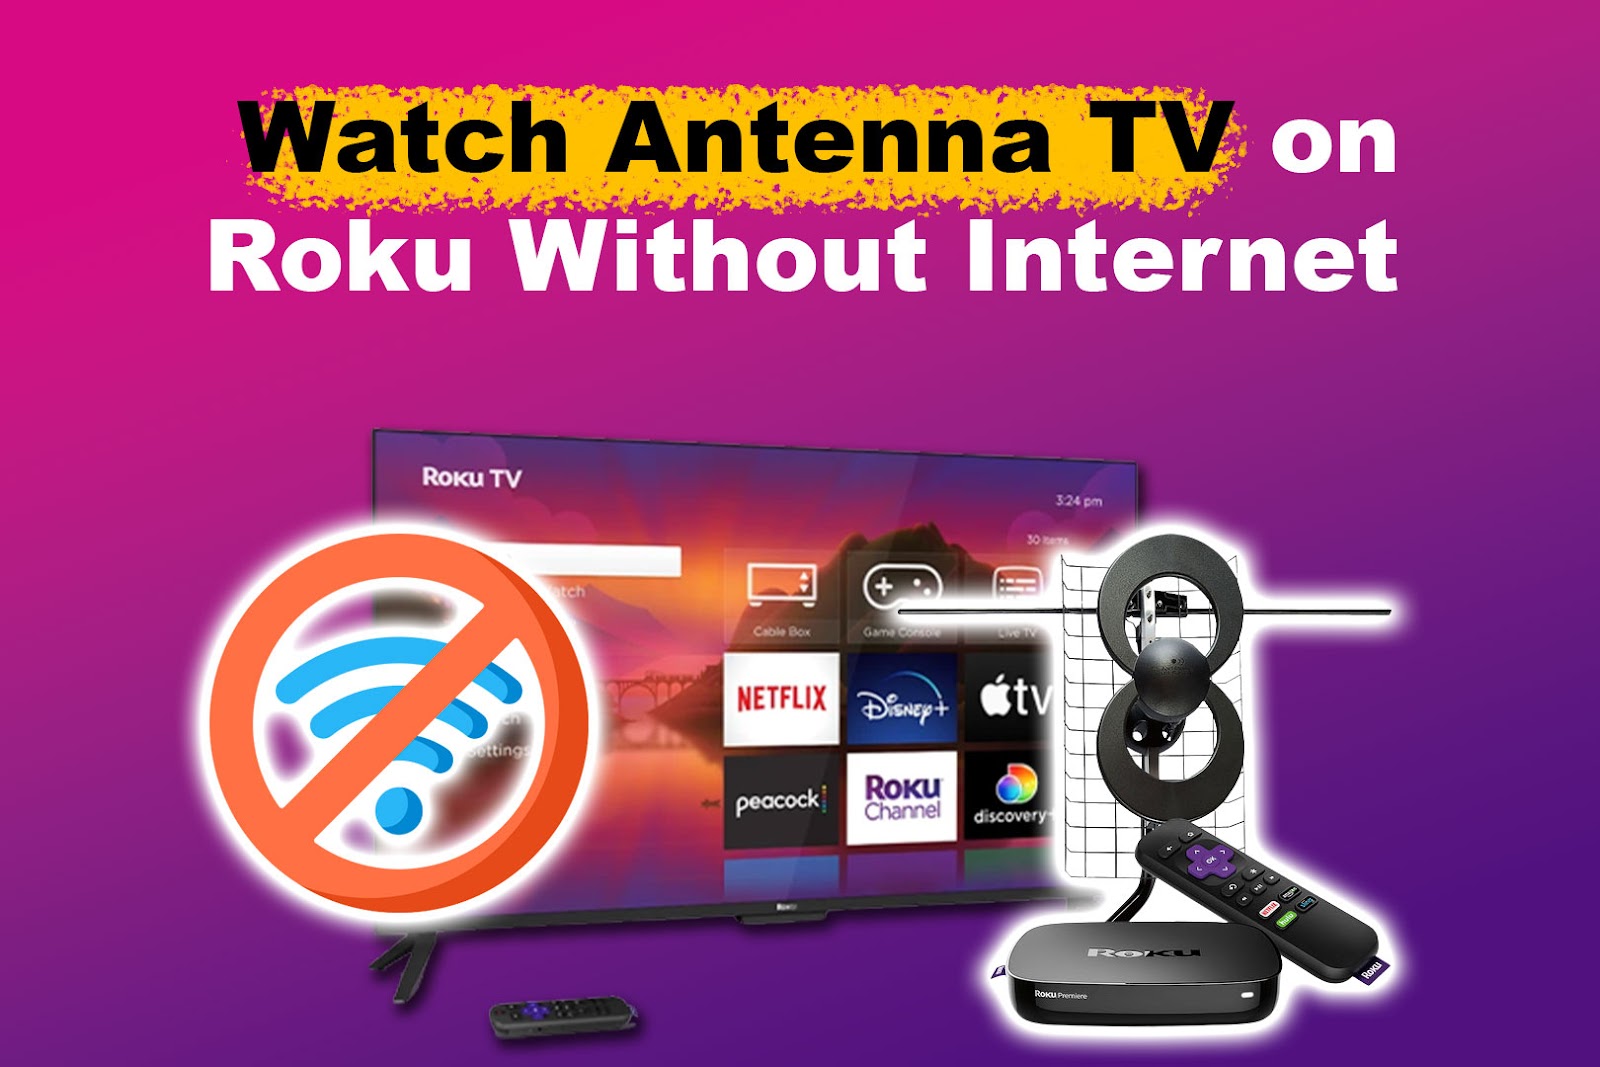 How to Watch Antenna TV on Roku Without Internet